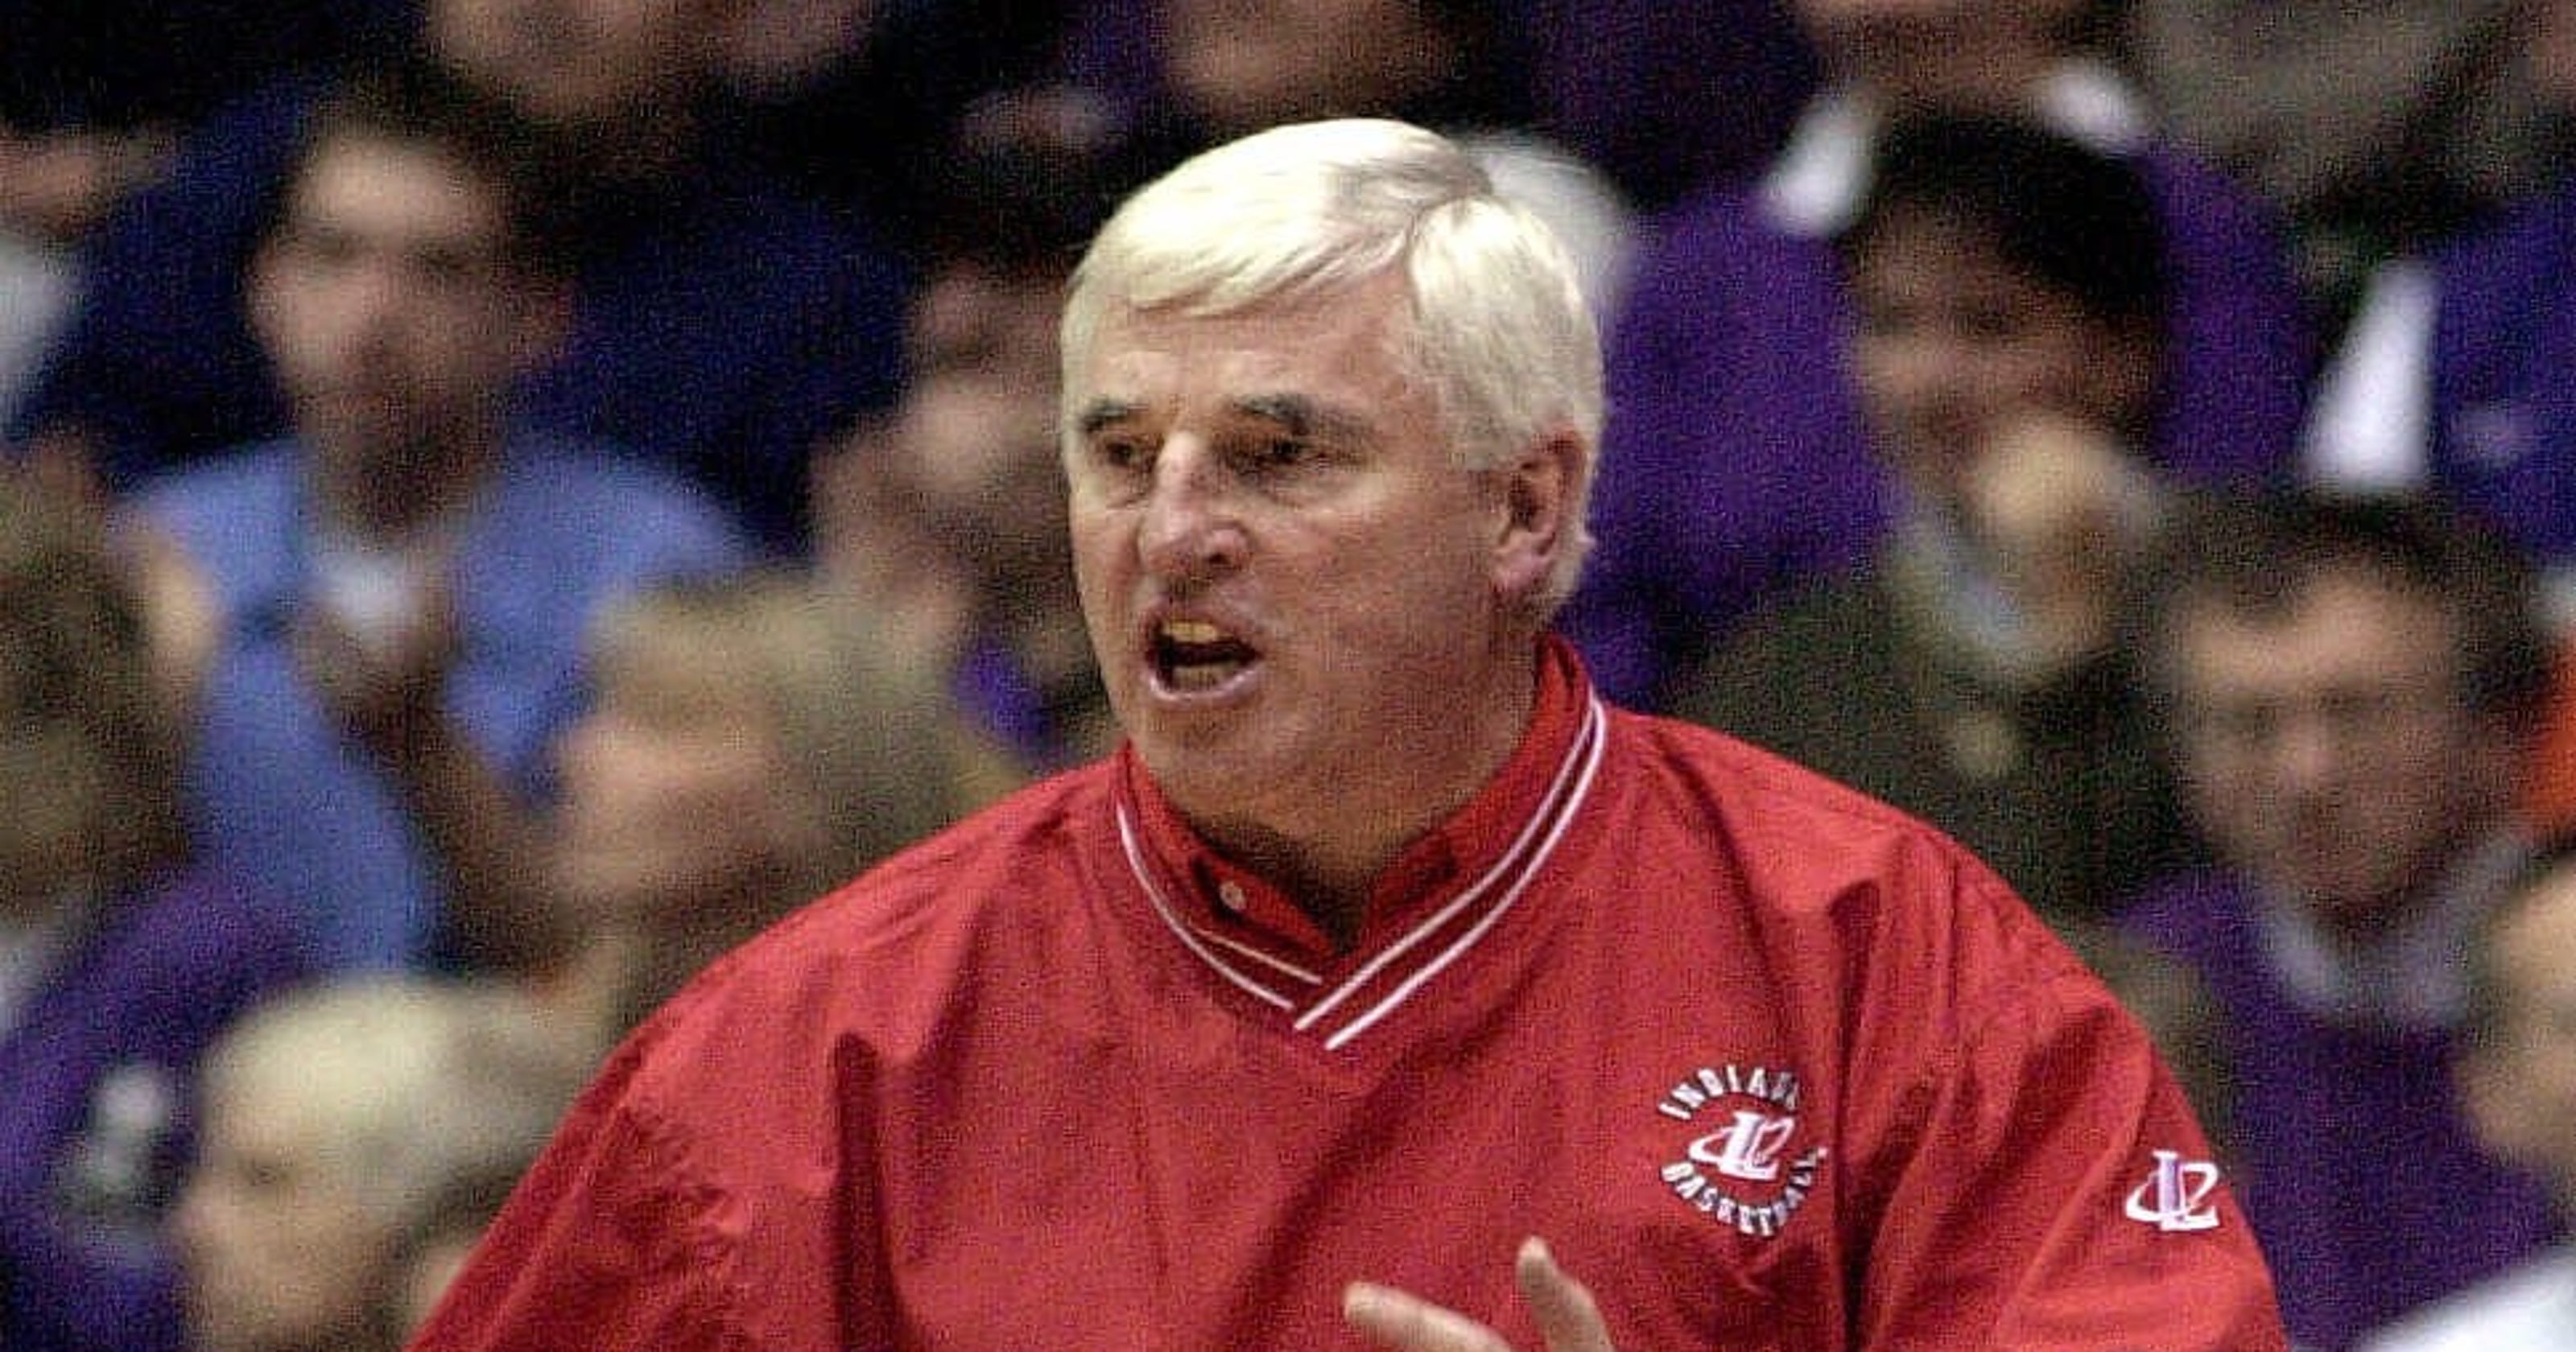 Bobby Knight 'not well,' longtime Indiana Hoosiers radio voice says2982 x 1680